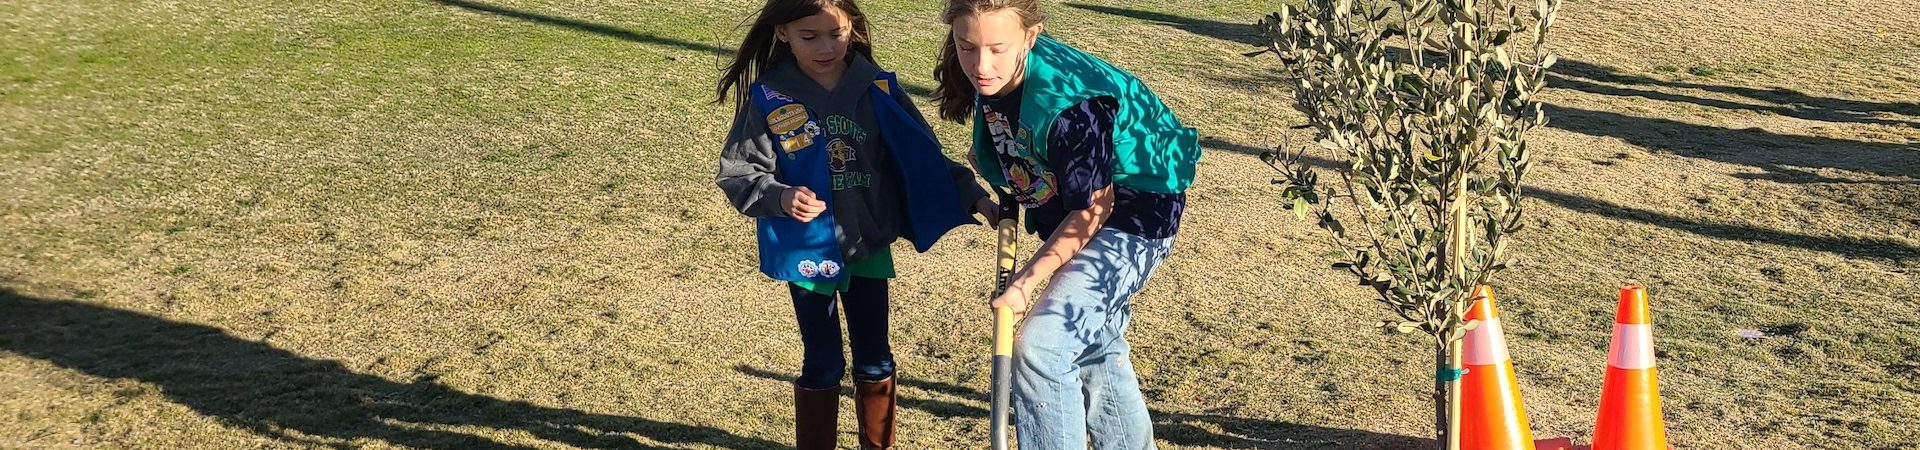  girl scouts planting tree at park 